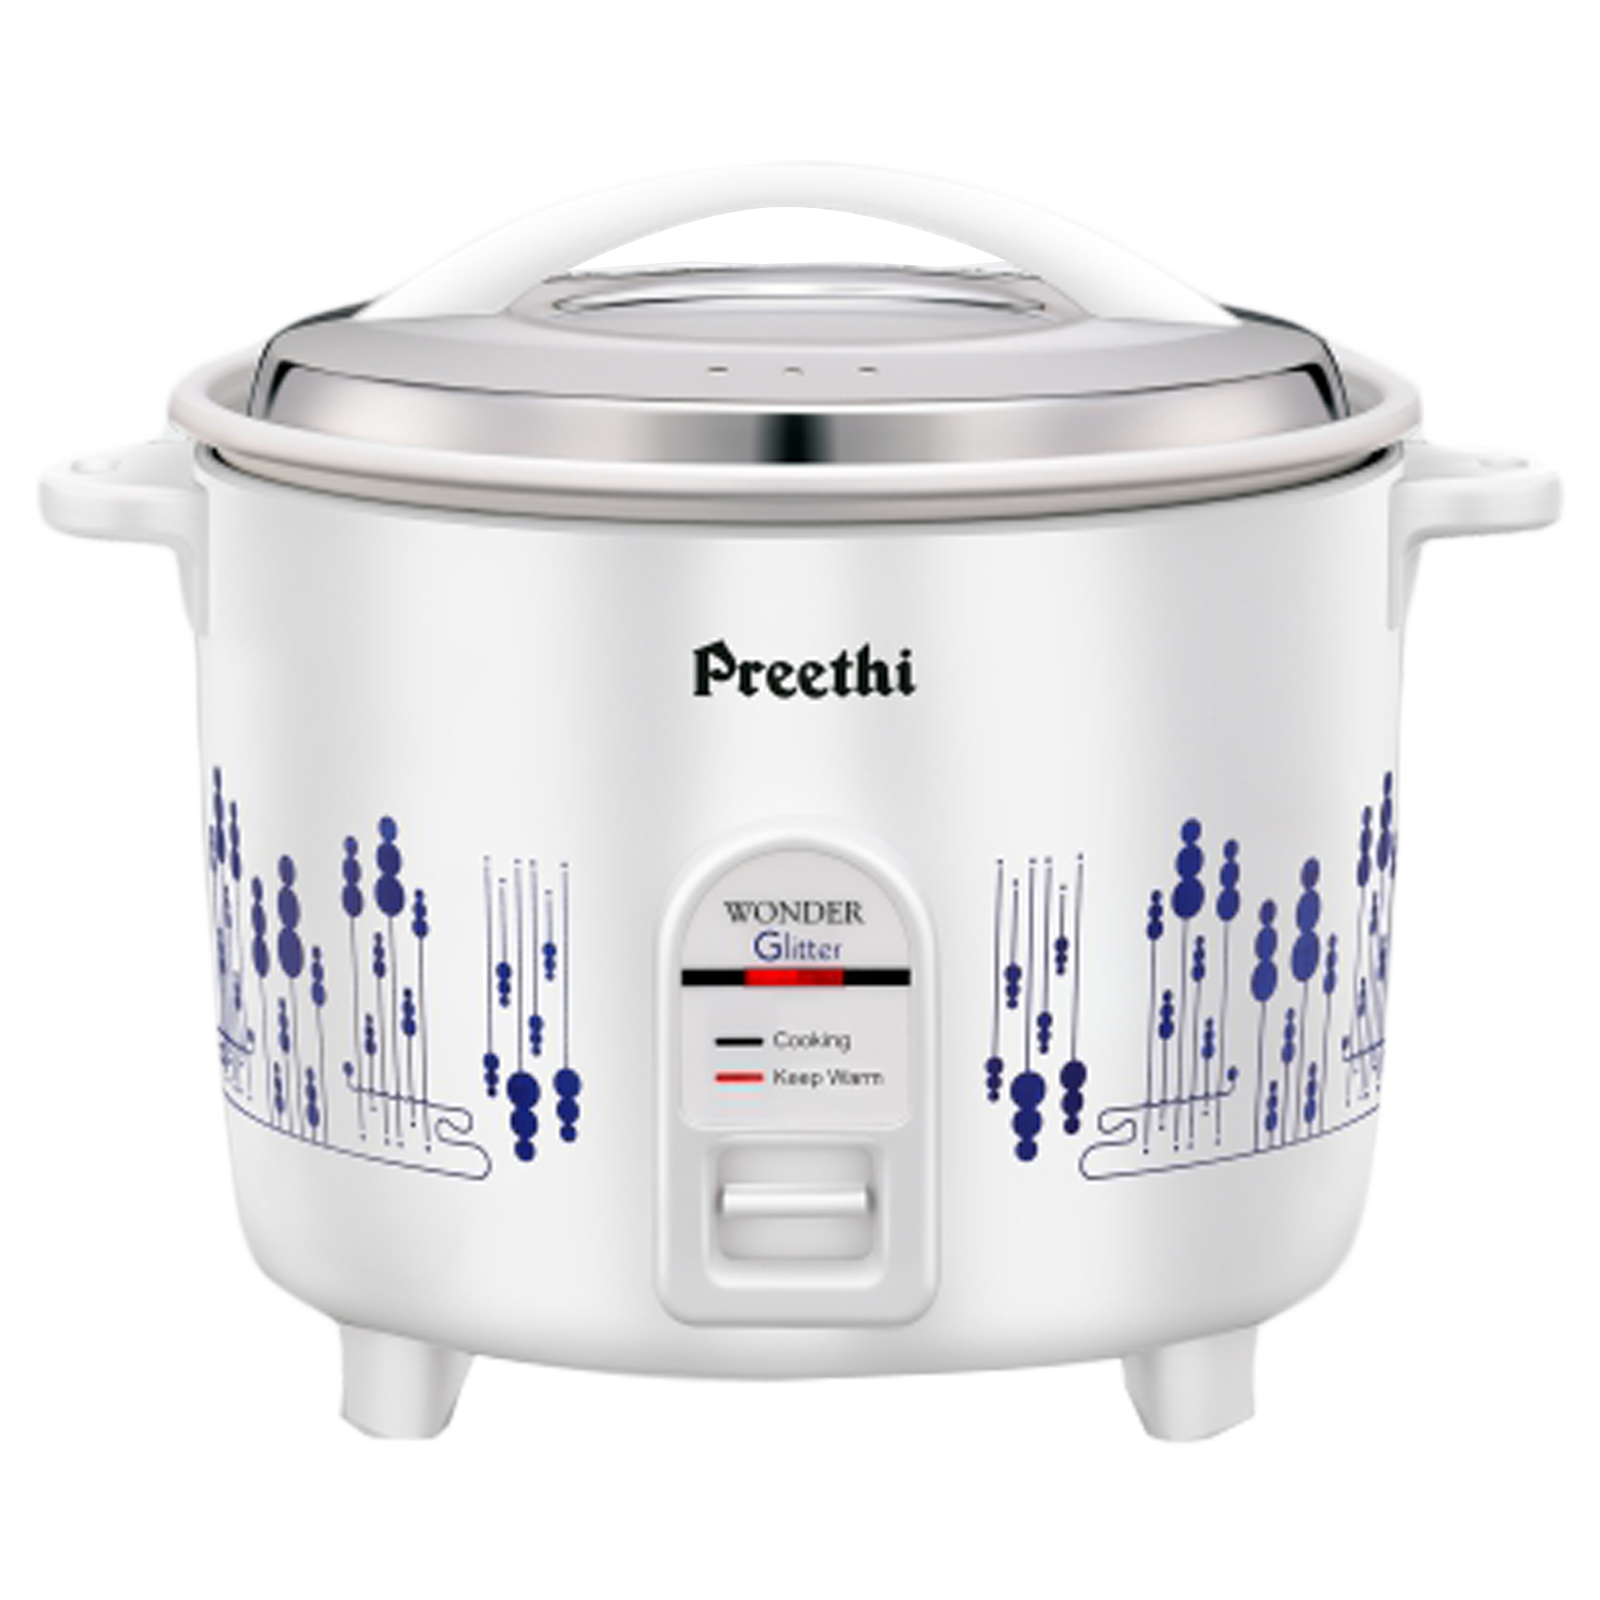 Preethi Glitter 1 Litre Electric Rice Cooker (Anodized Aluminium Pan, RC322, White)